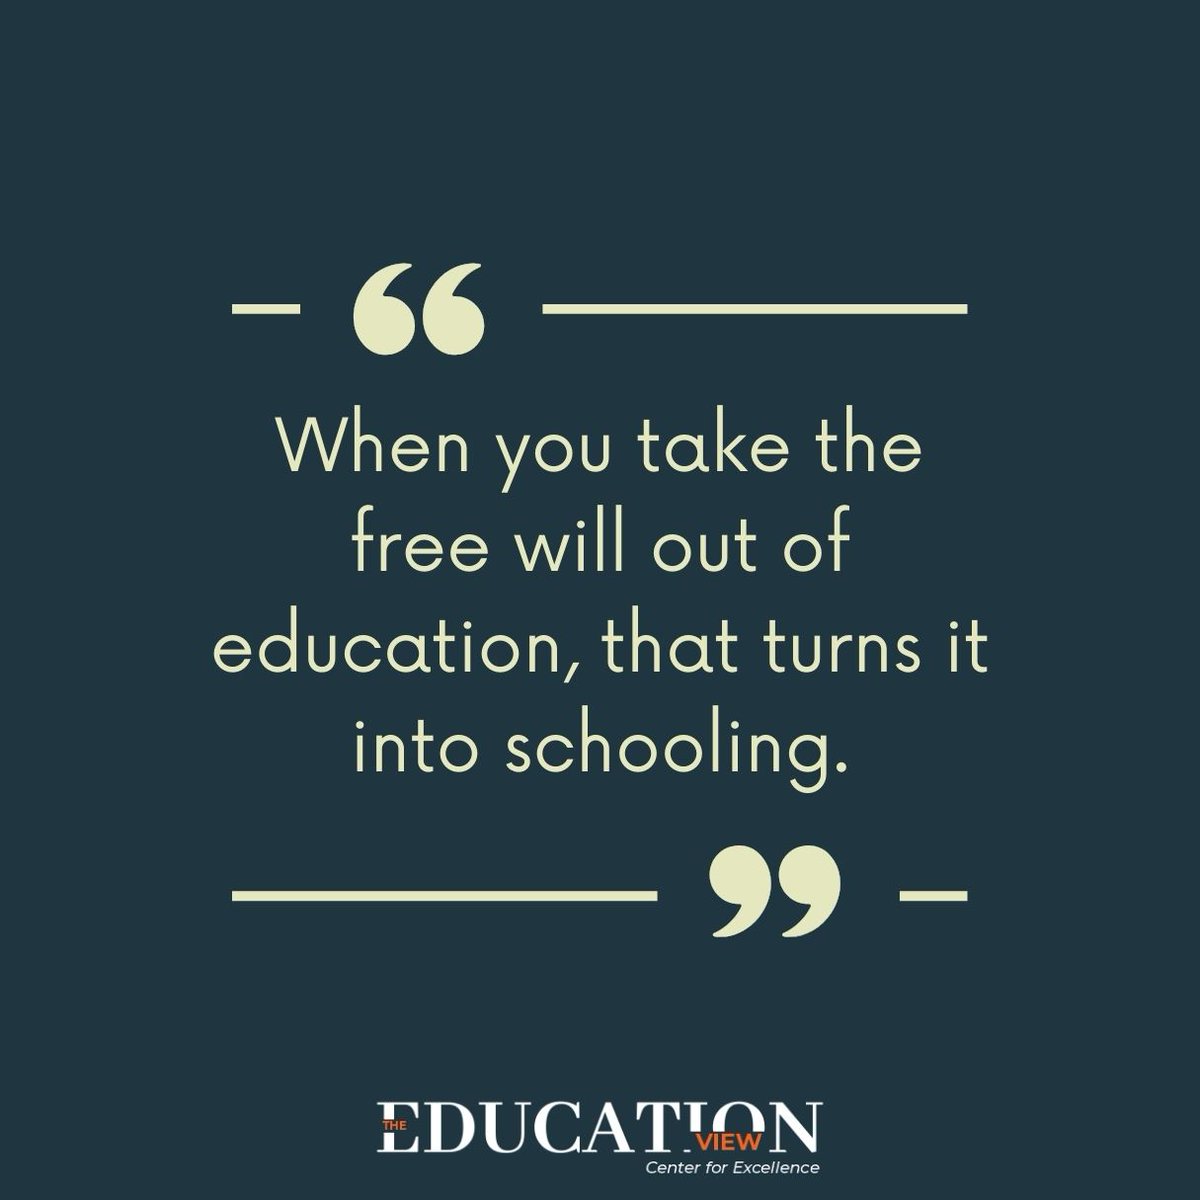 Empowering education: Free will is the essence of true learning. Let's keep education free from constraints. 📚💡
.
.
.
.
.
.
#EducationFreedom #FreeWill #StudentEmpowerment #LearningJourney #EducationQuotes #Inspiration